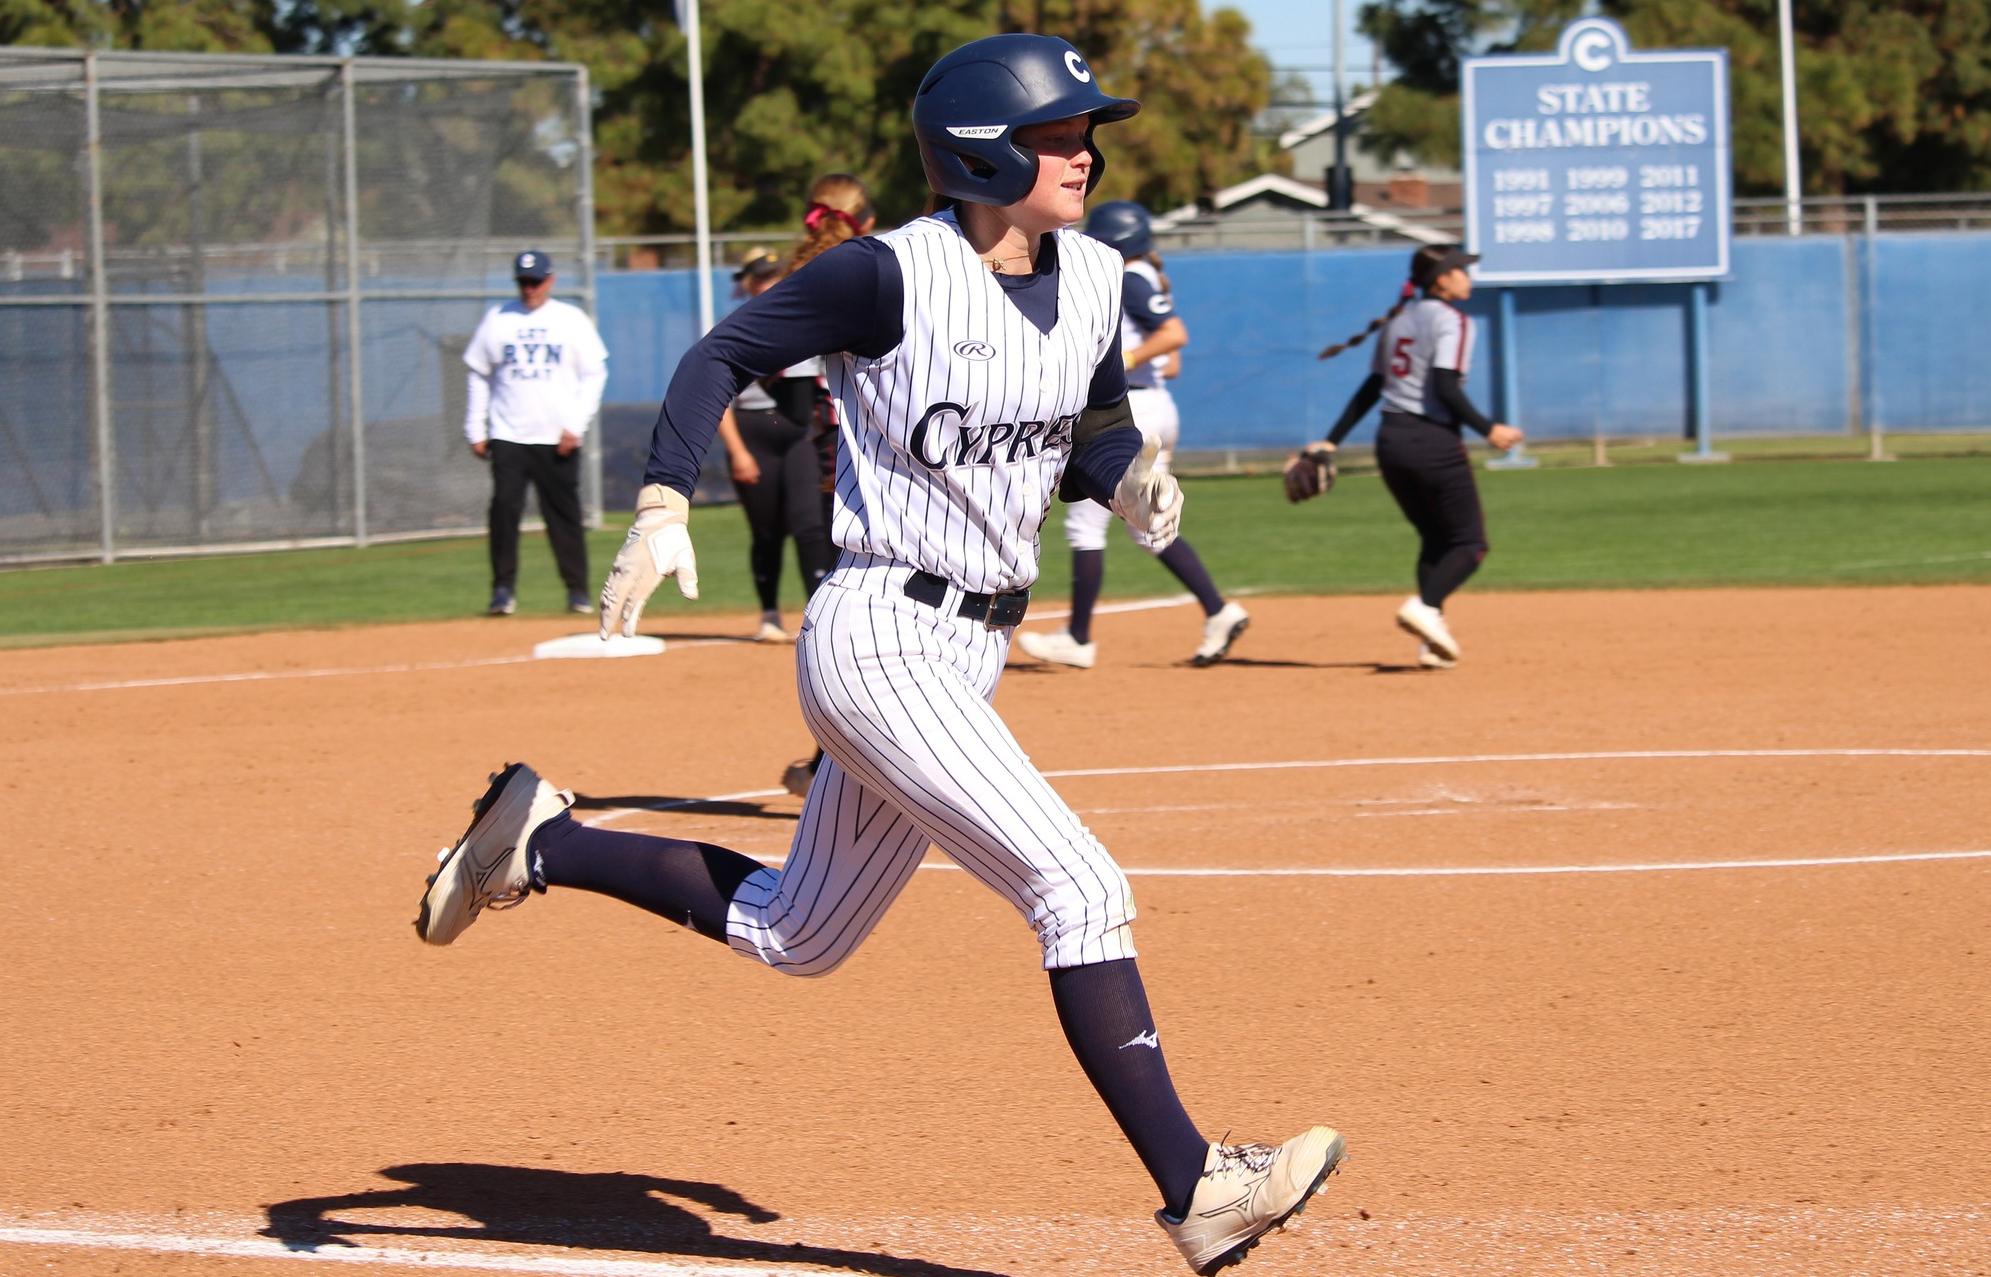 Chargers Sweep Antelope Valley in Doubleheader